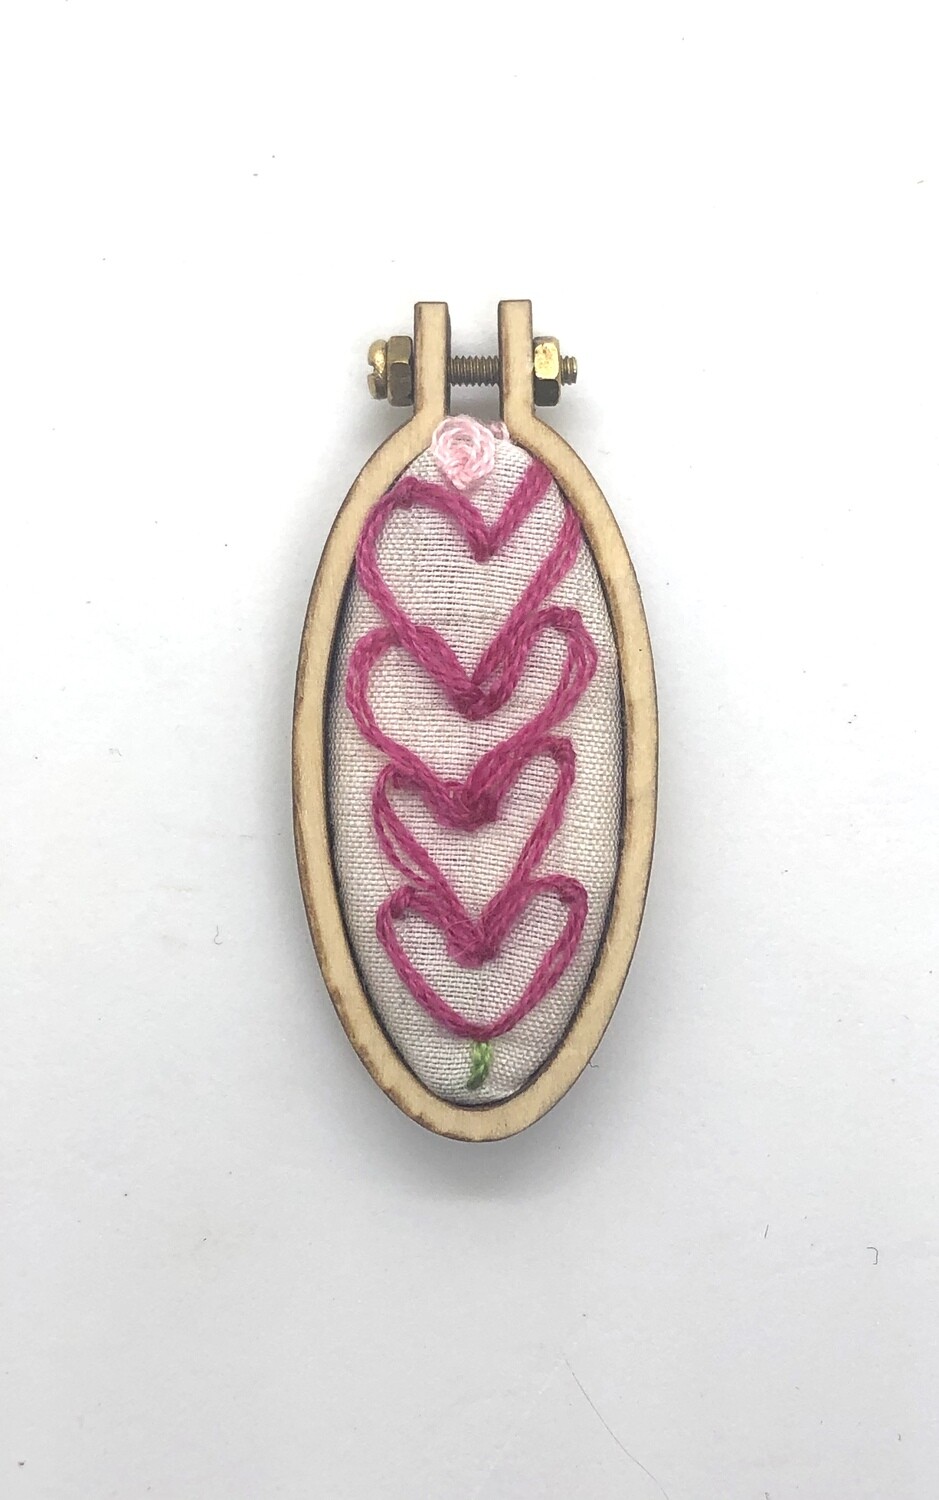 Stack of Hearts - Embroidered Pendant or Magnet